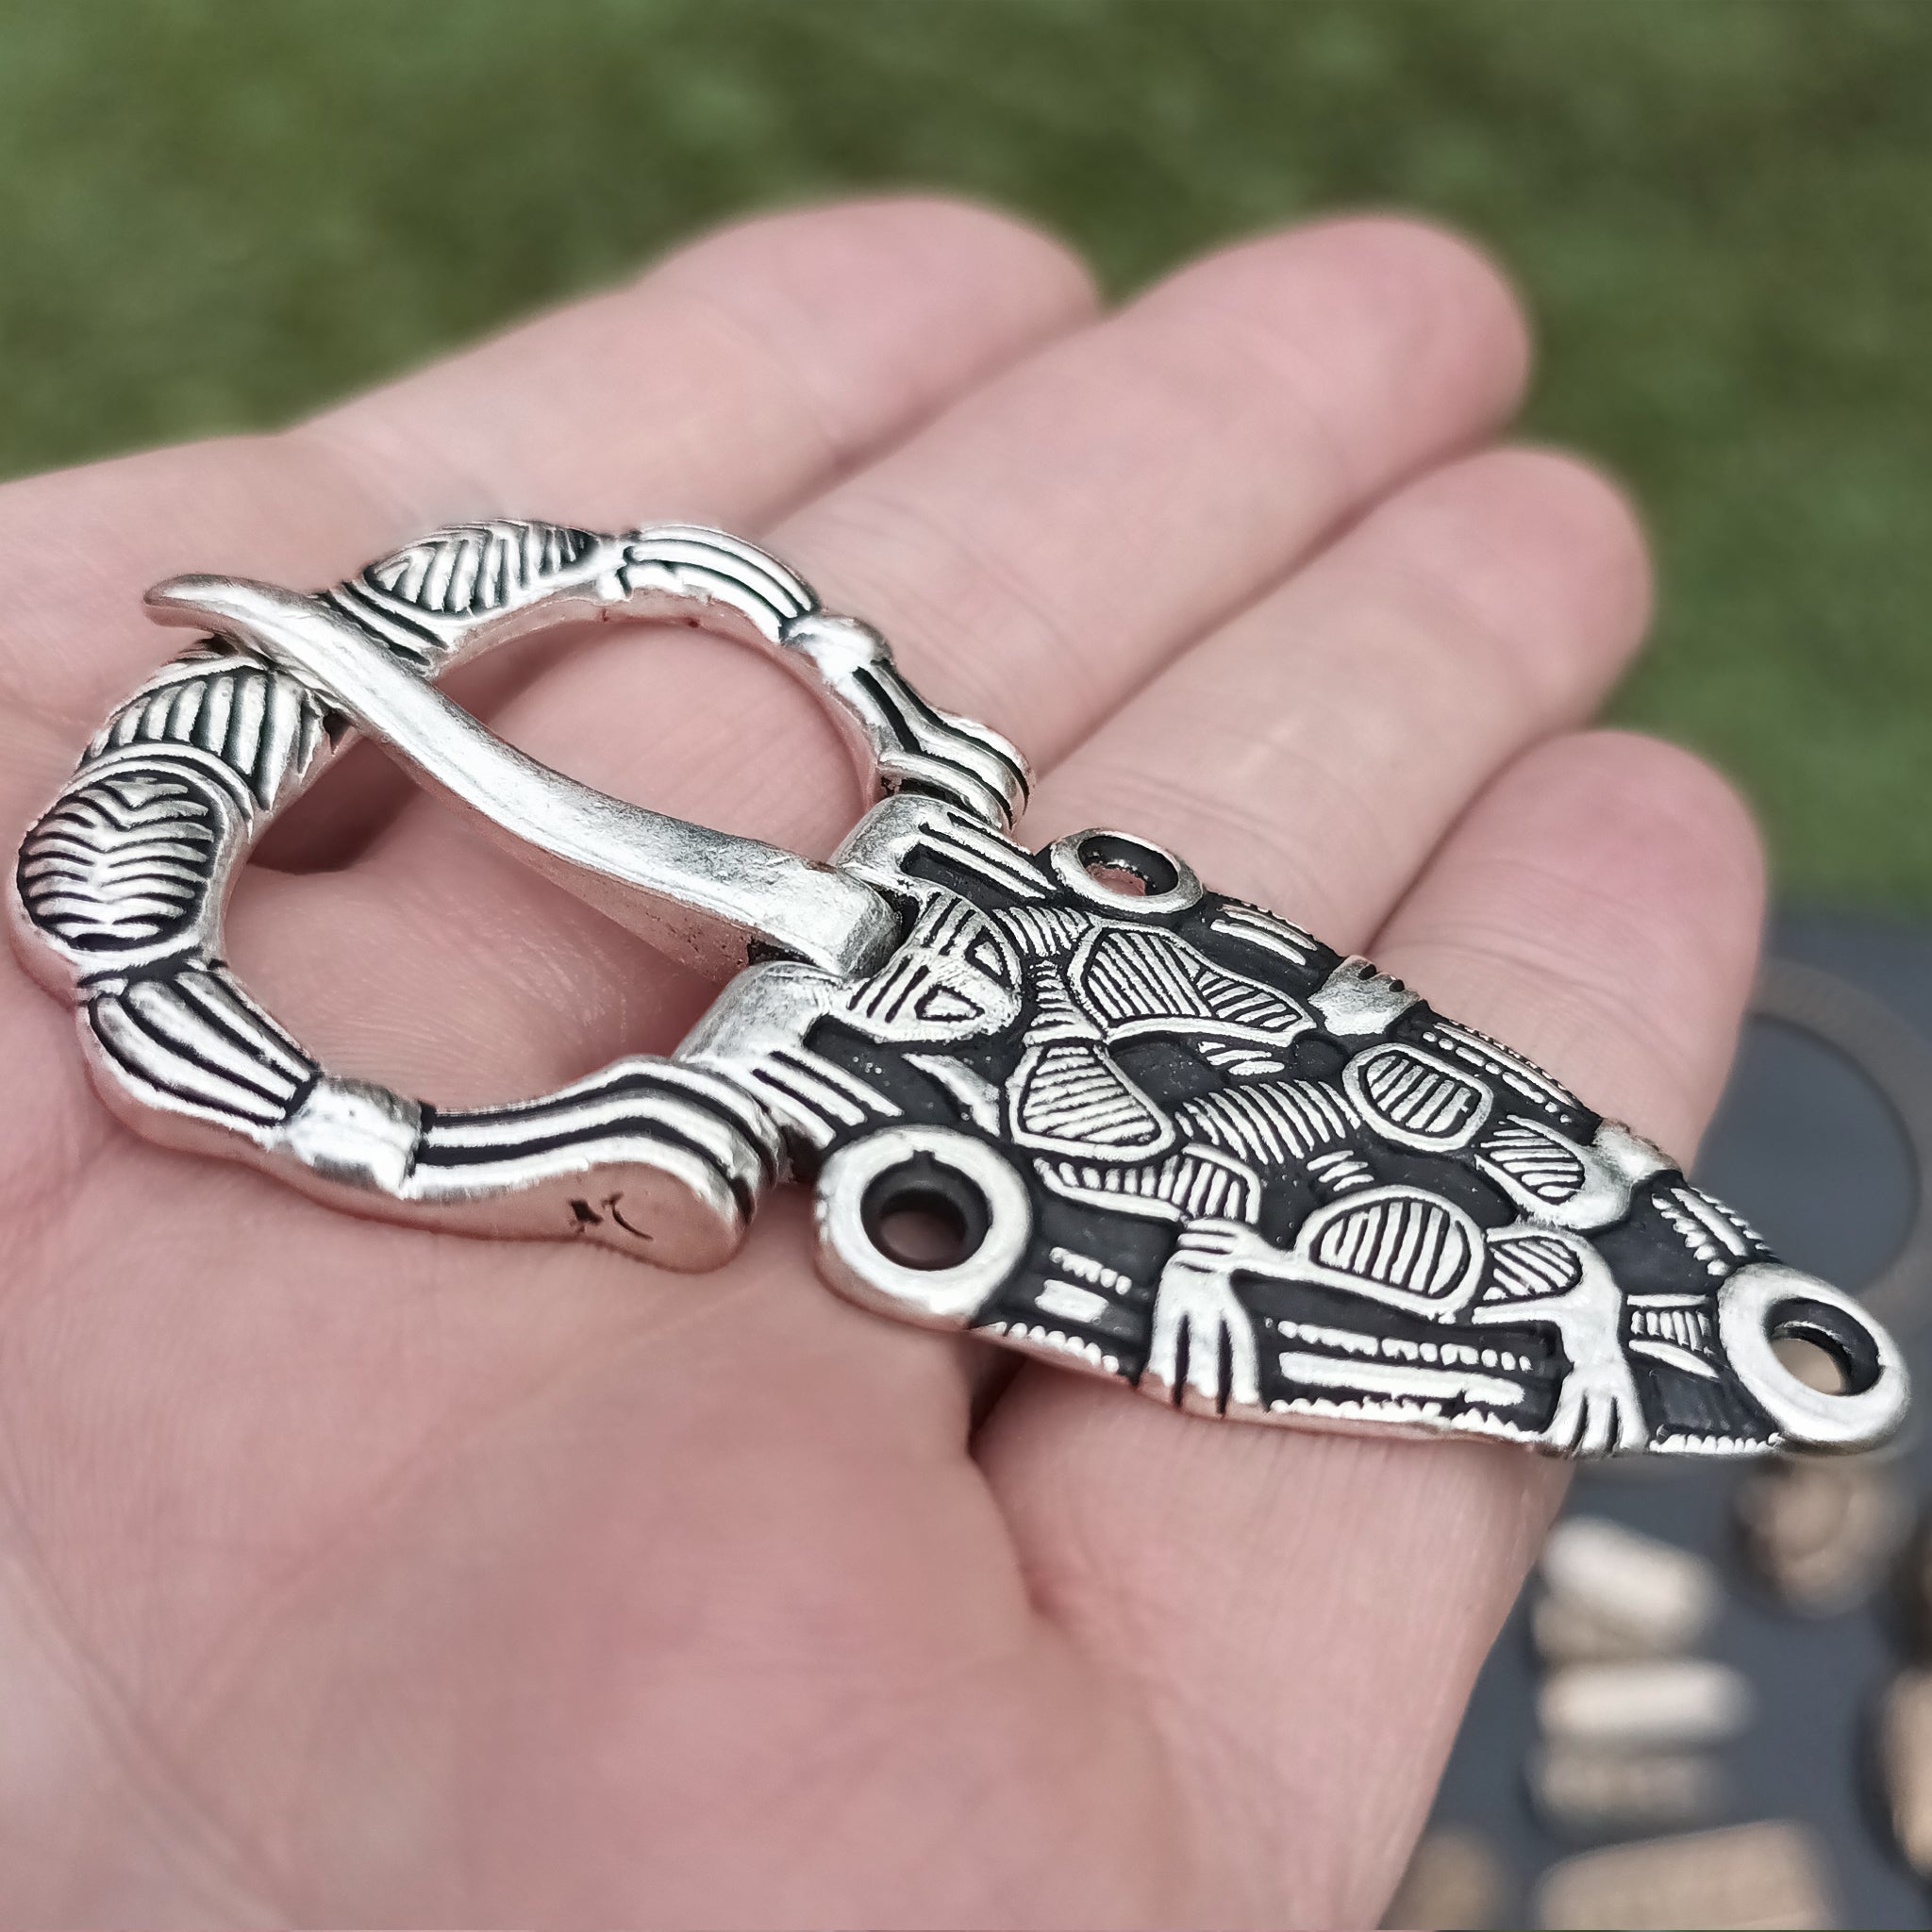 Silver Plated Oseberg Style Viking Buckle on Hand - Side Angle View